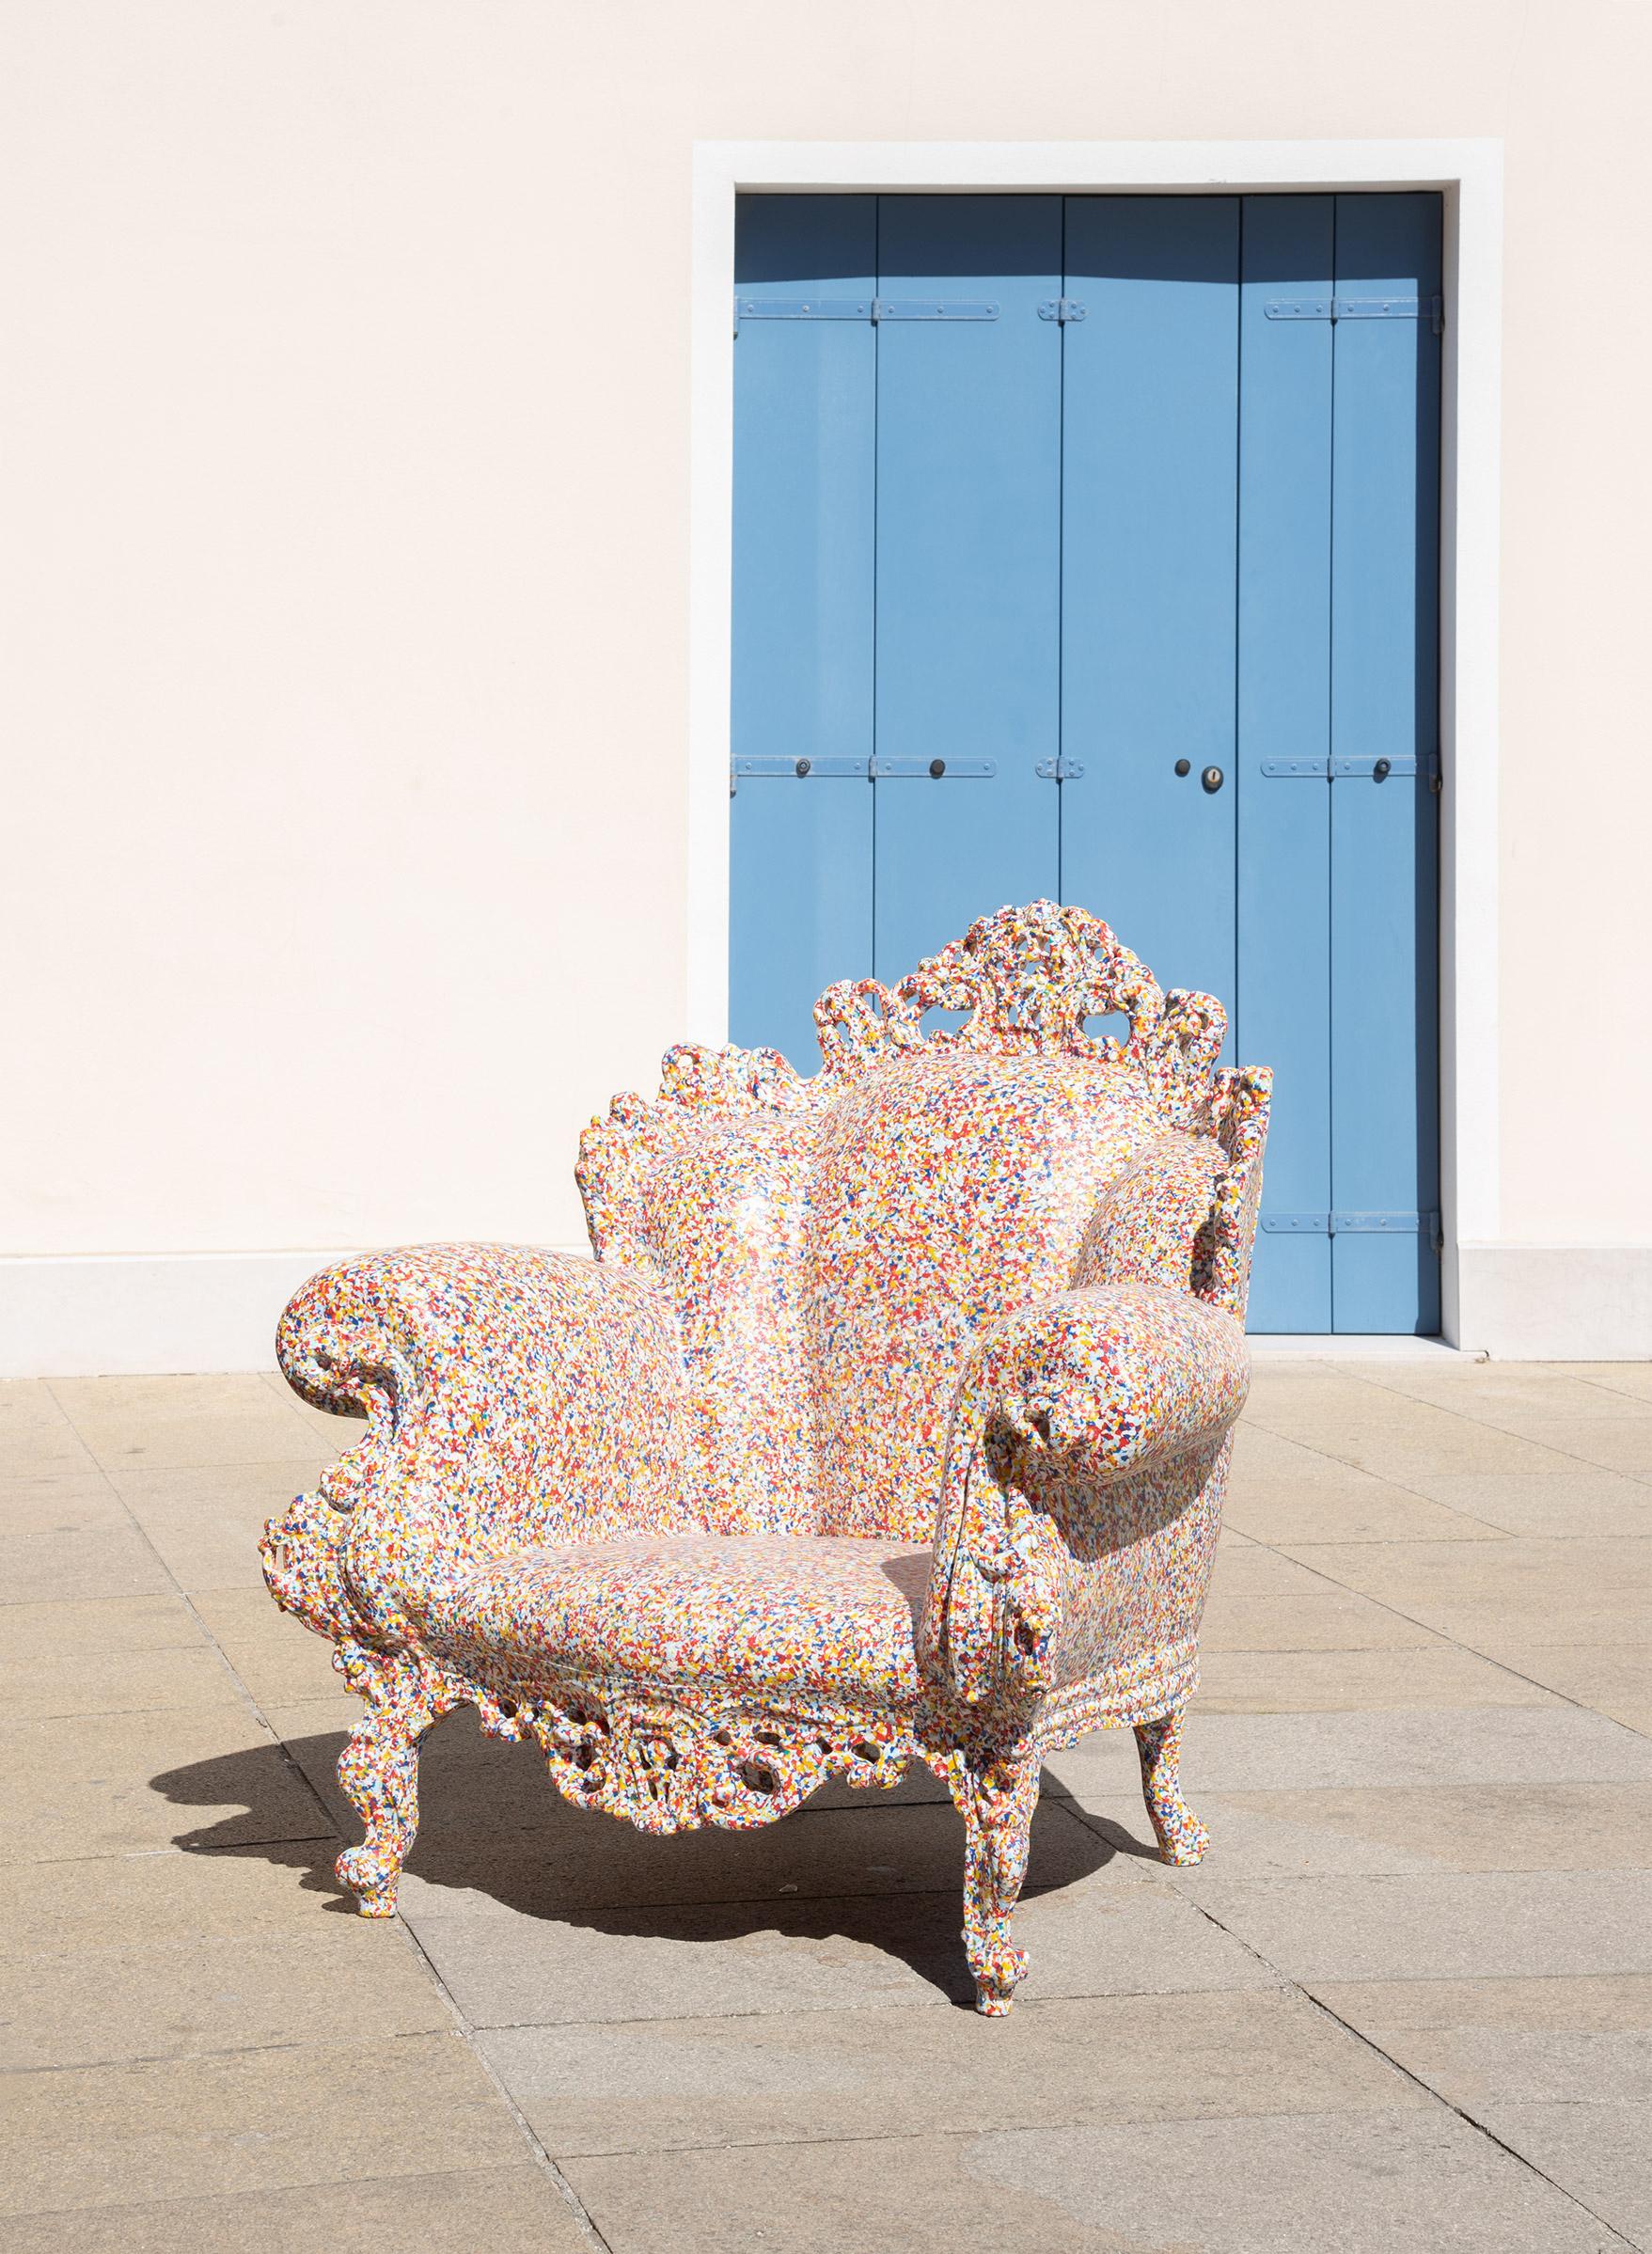 “I think many people will already know my “Proust armchair”. It is a romantic, baroque chair, on which an endless number of multi-coloured dots are hand-paint- ed using the pointillism technique. These dots cover the whole armchair, both the fabric